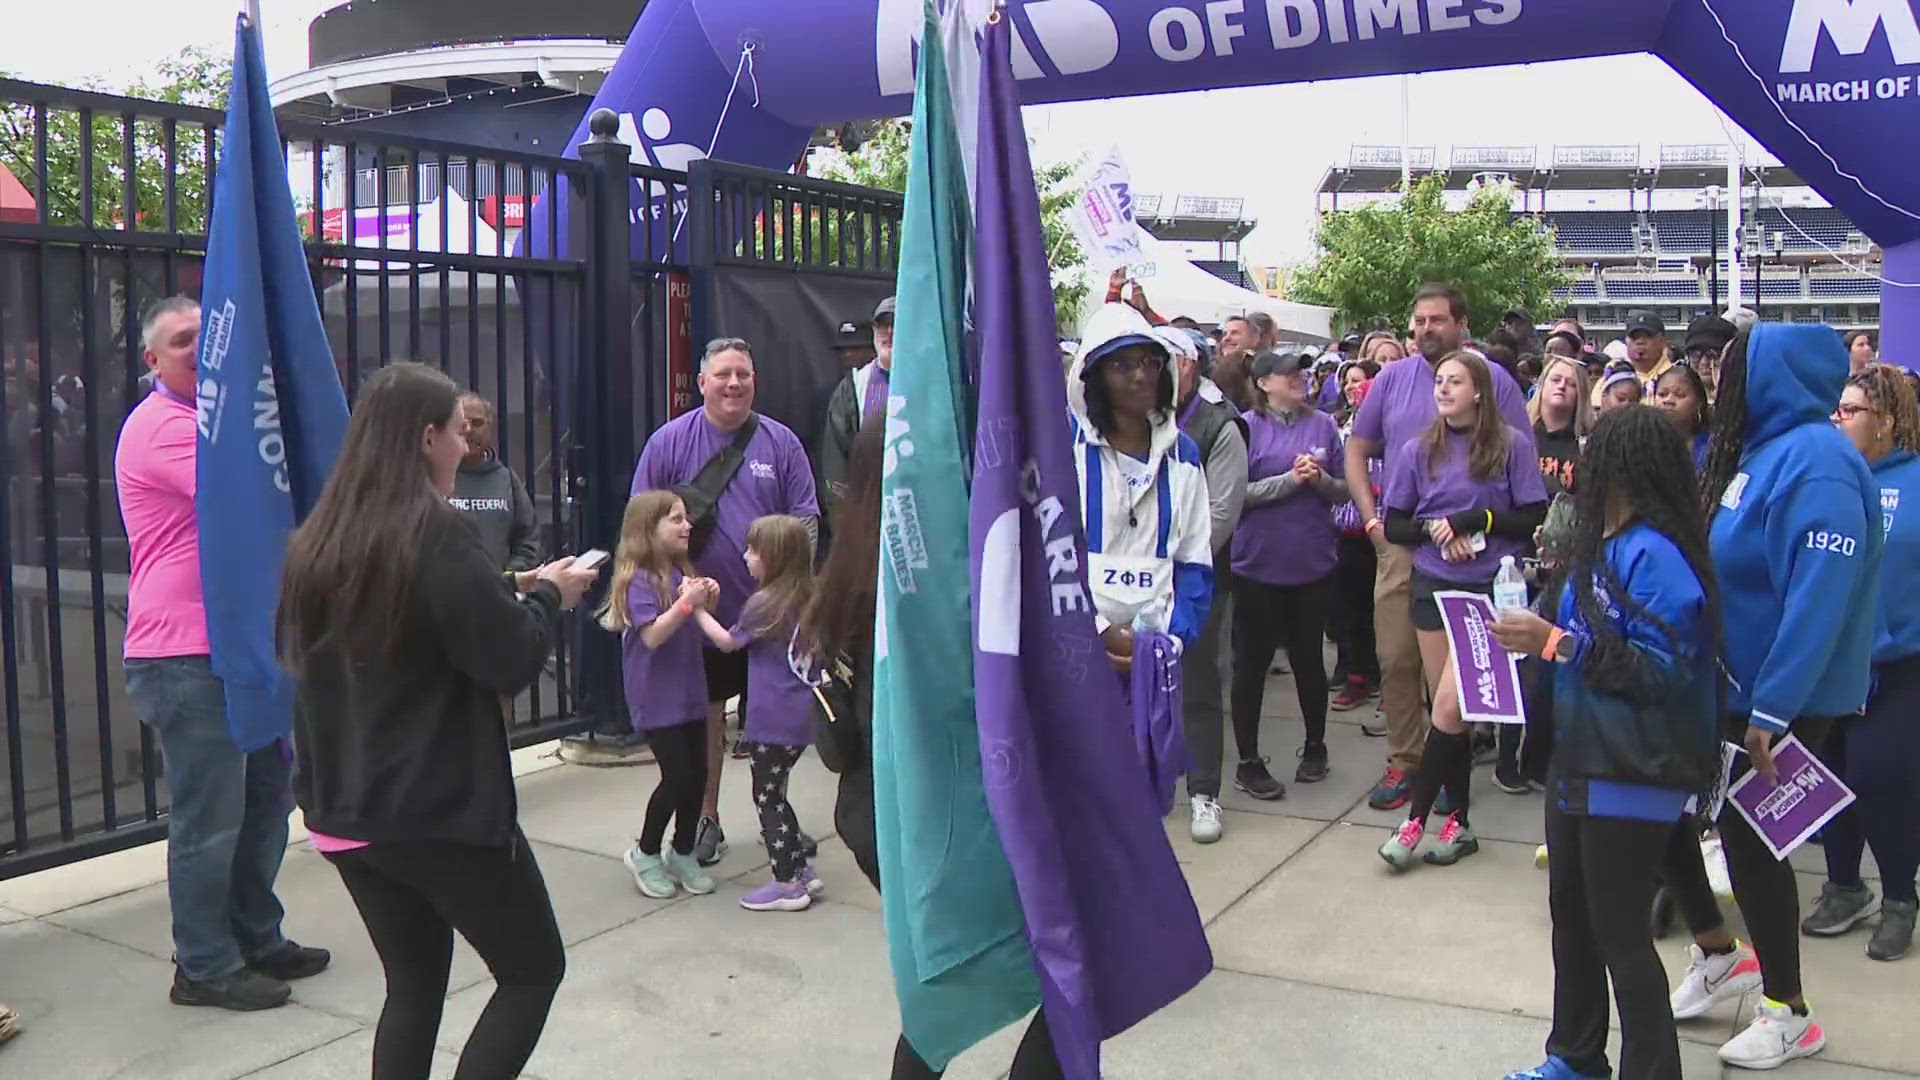 Thousands of people showed up at Nats Park to participate in the three mile walk around the Navy Yard area to raise money in the fight for healthy moms and children.